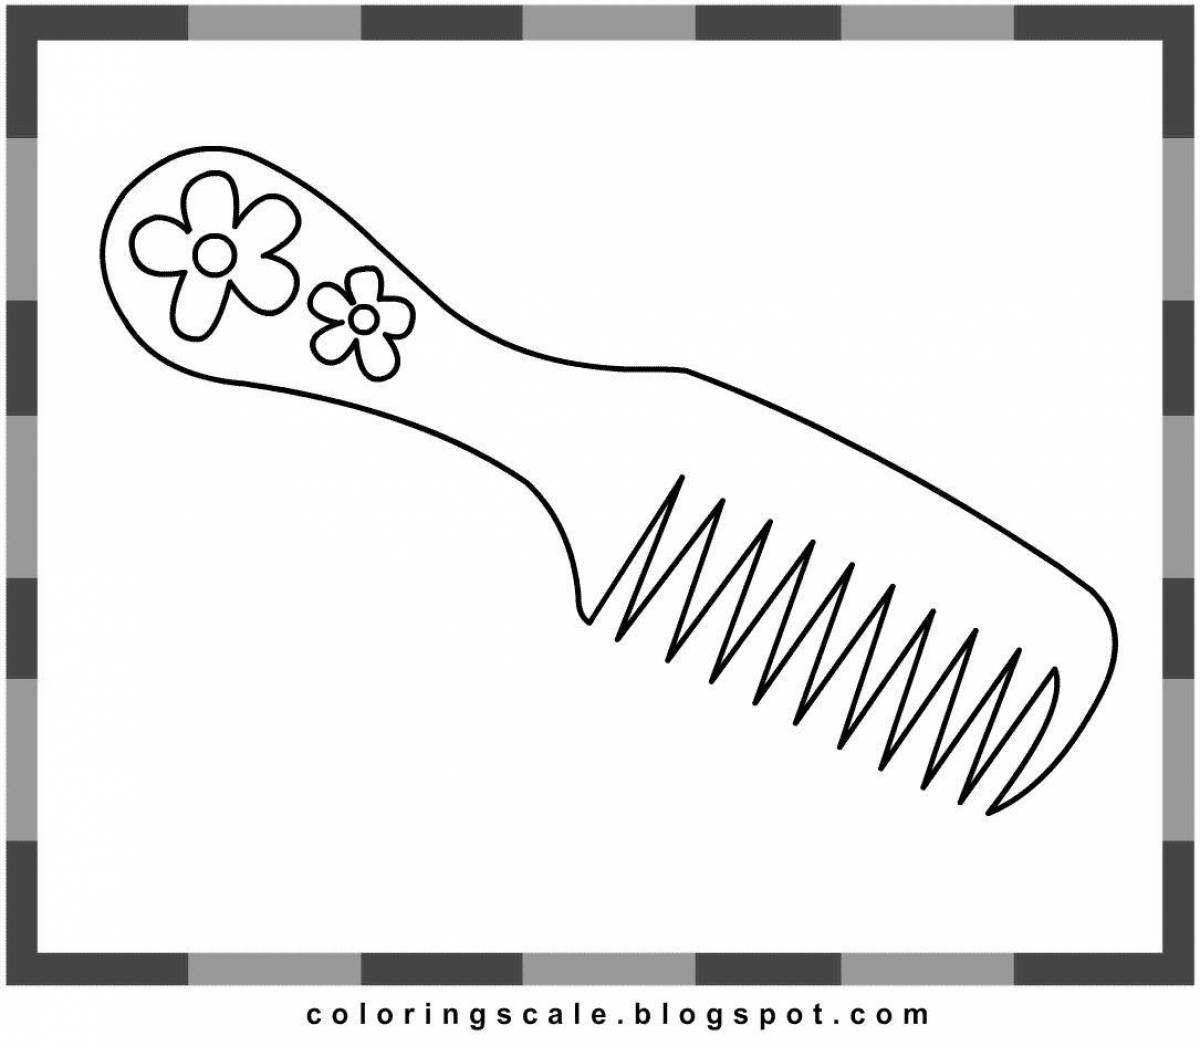 Bright comb coloring page for kids